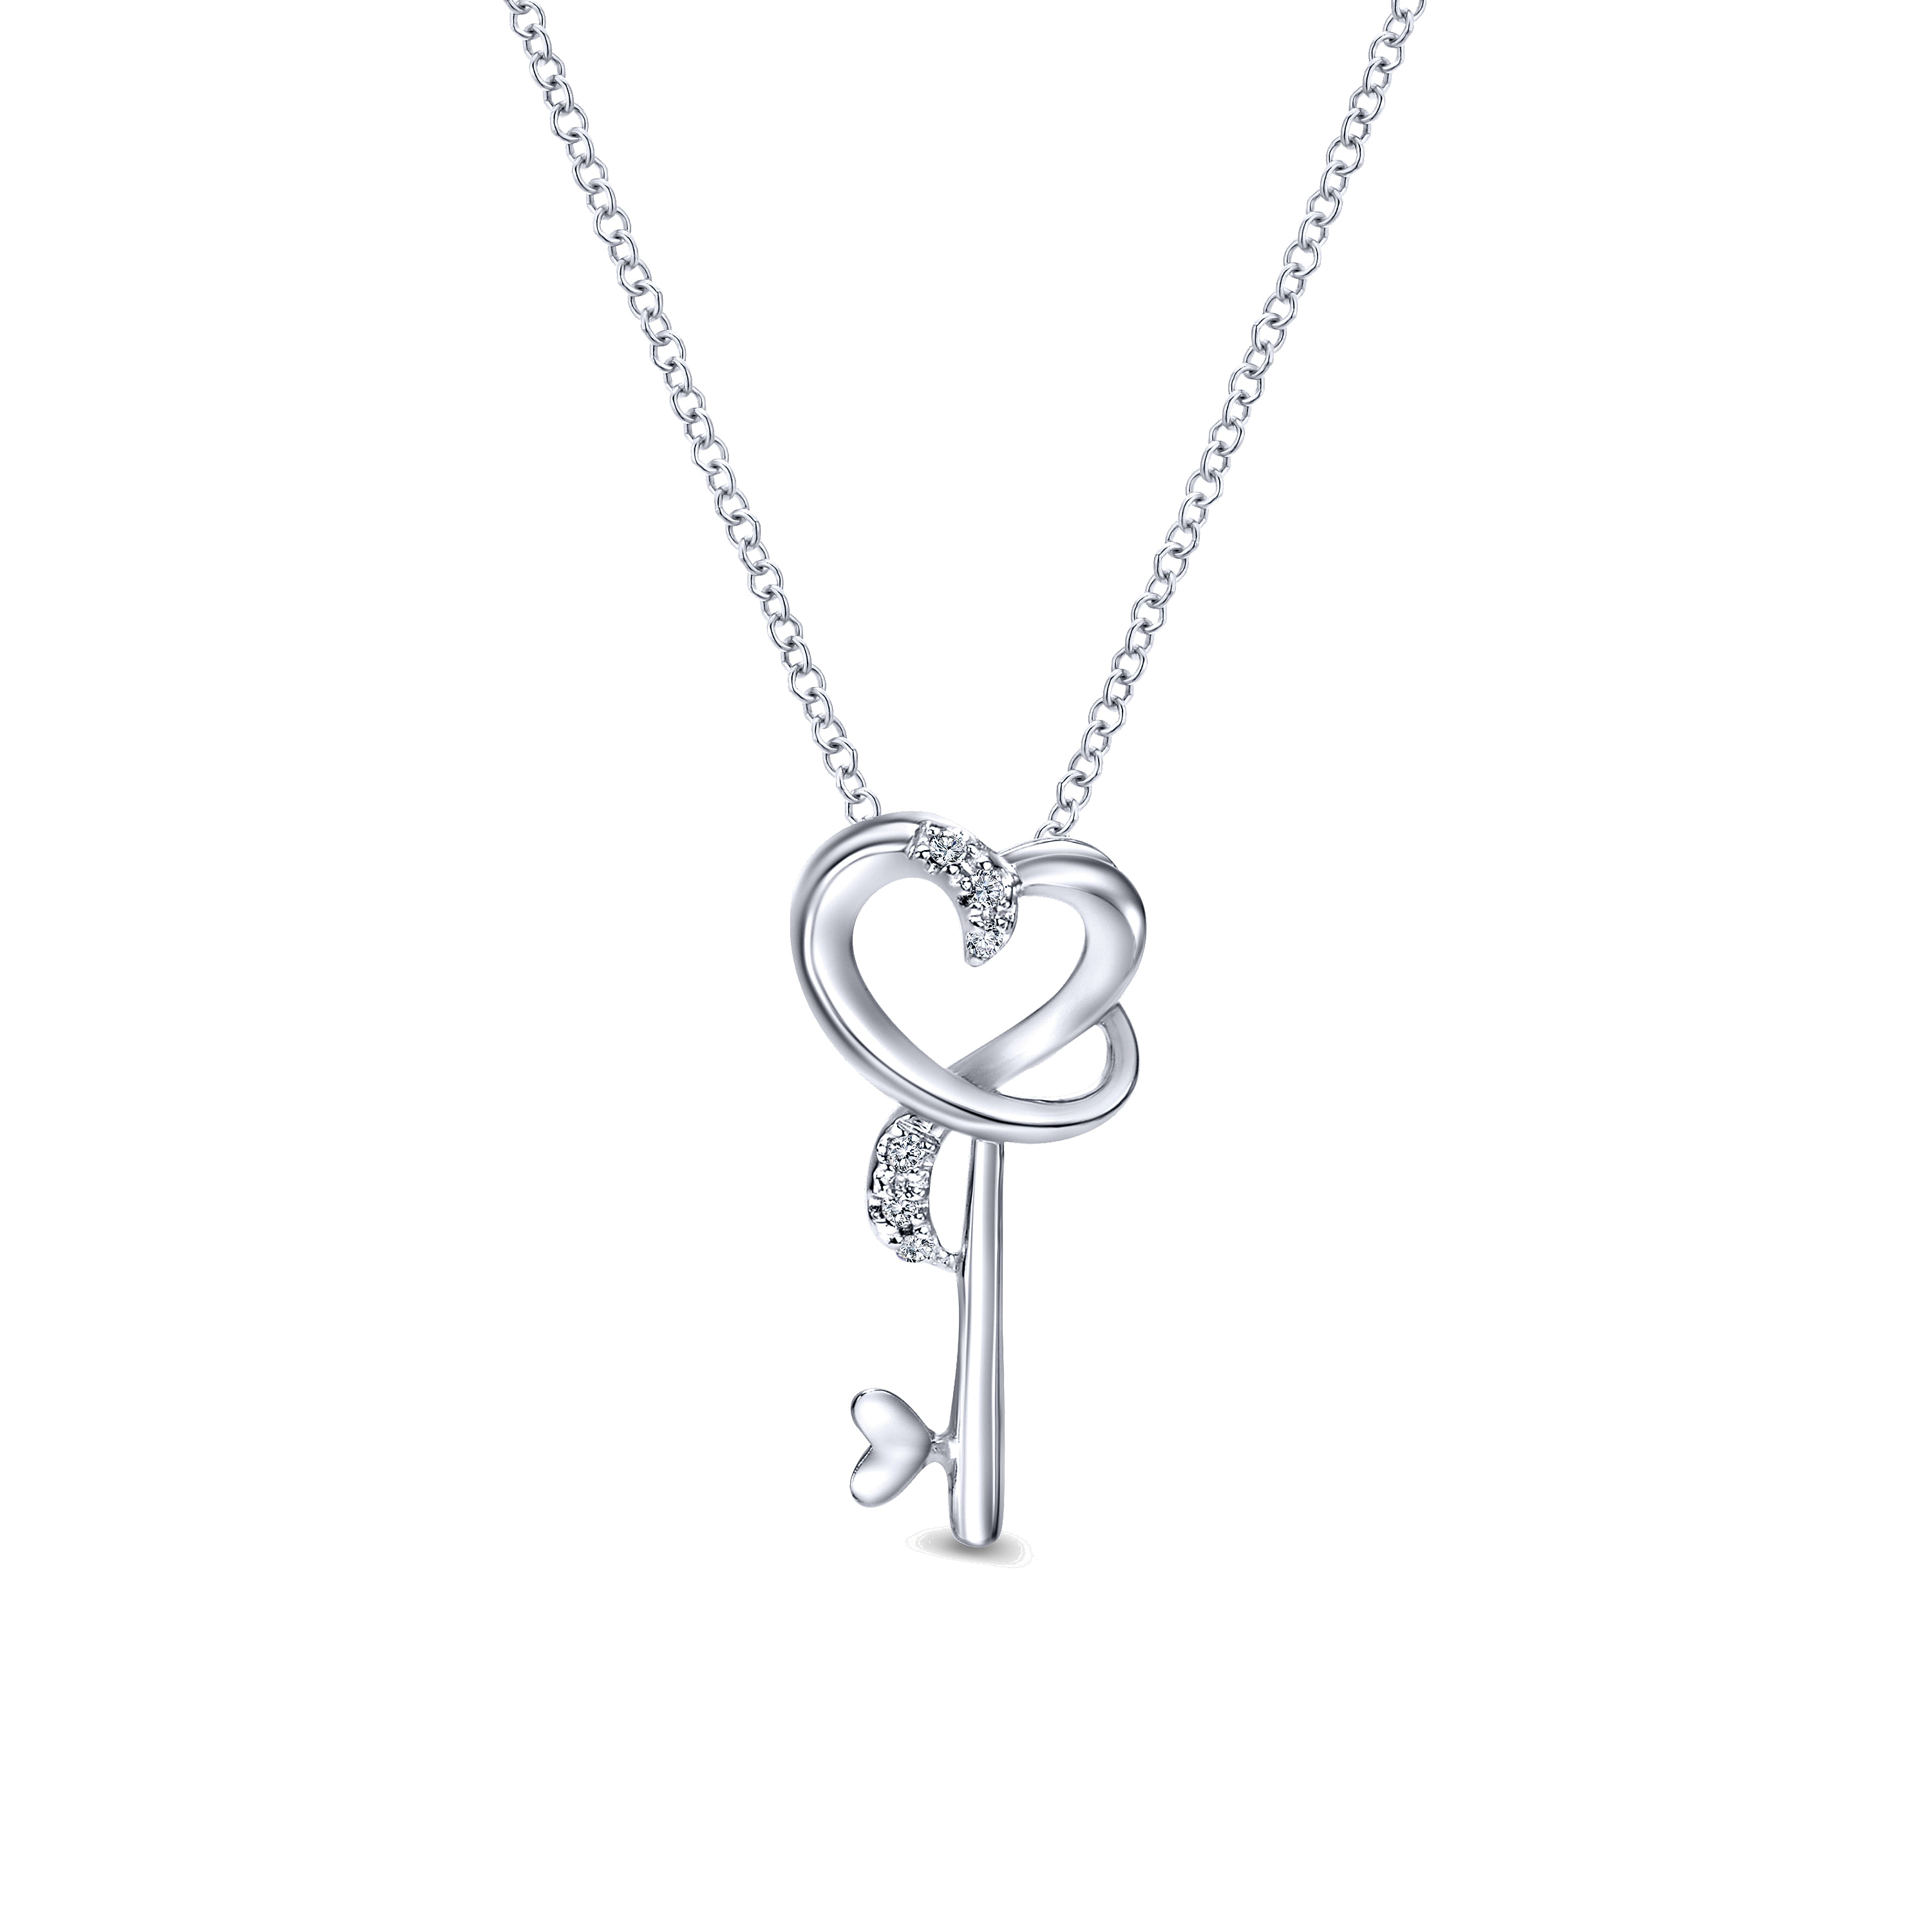 18 inch 925 Sterling Silver Heart Key Pendant Necklace with Diamonds